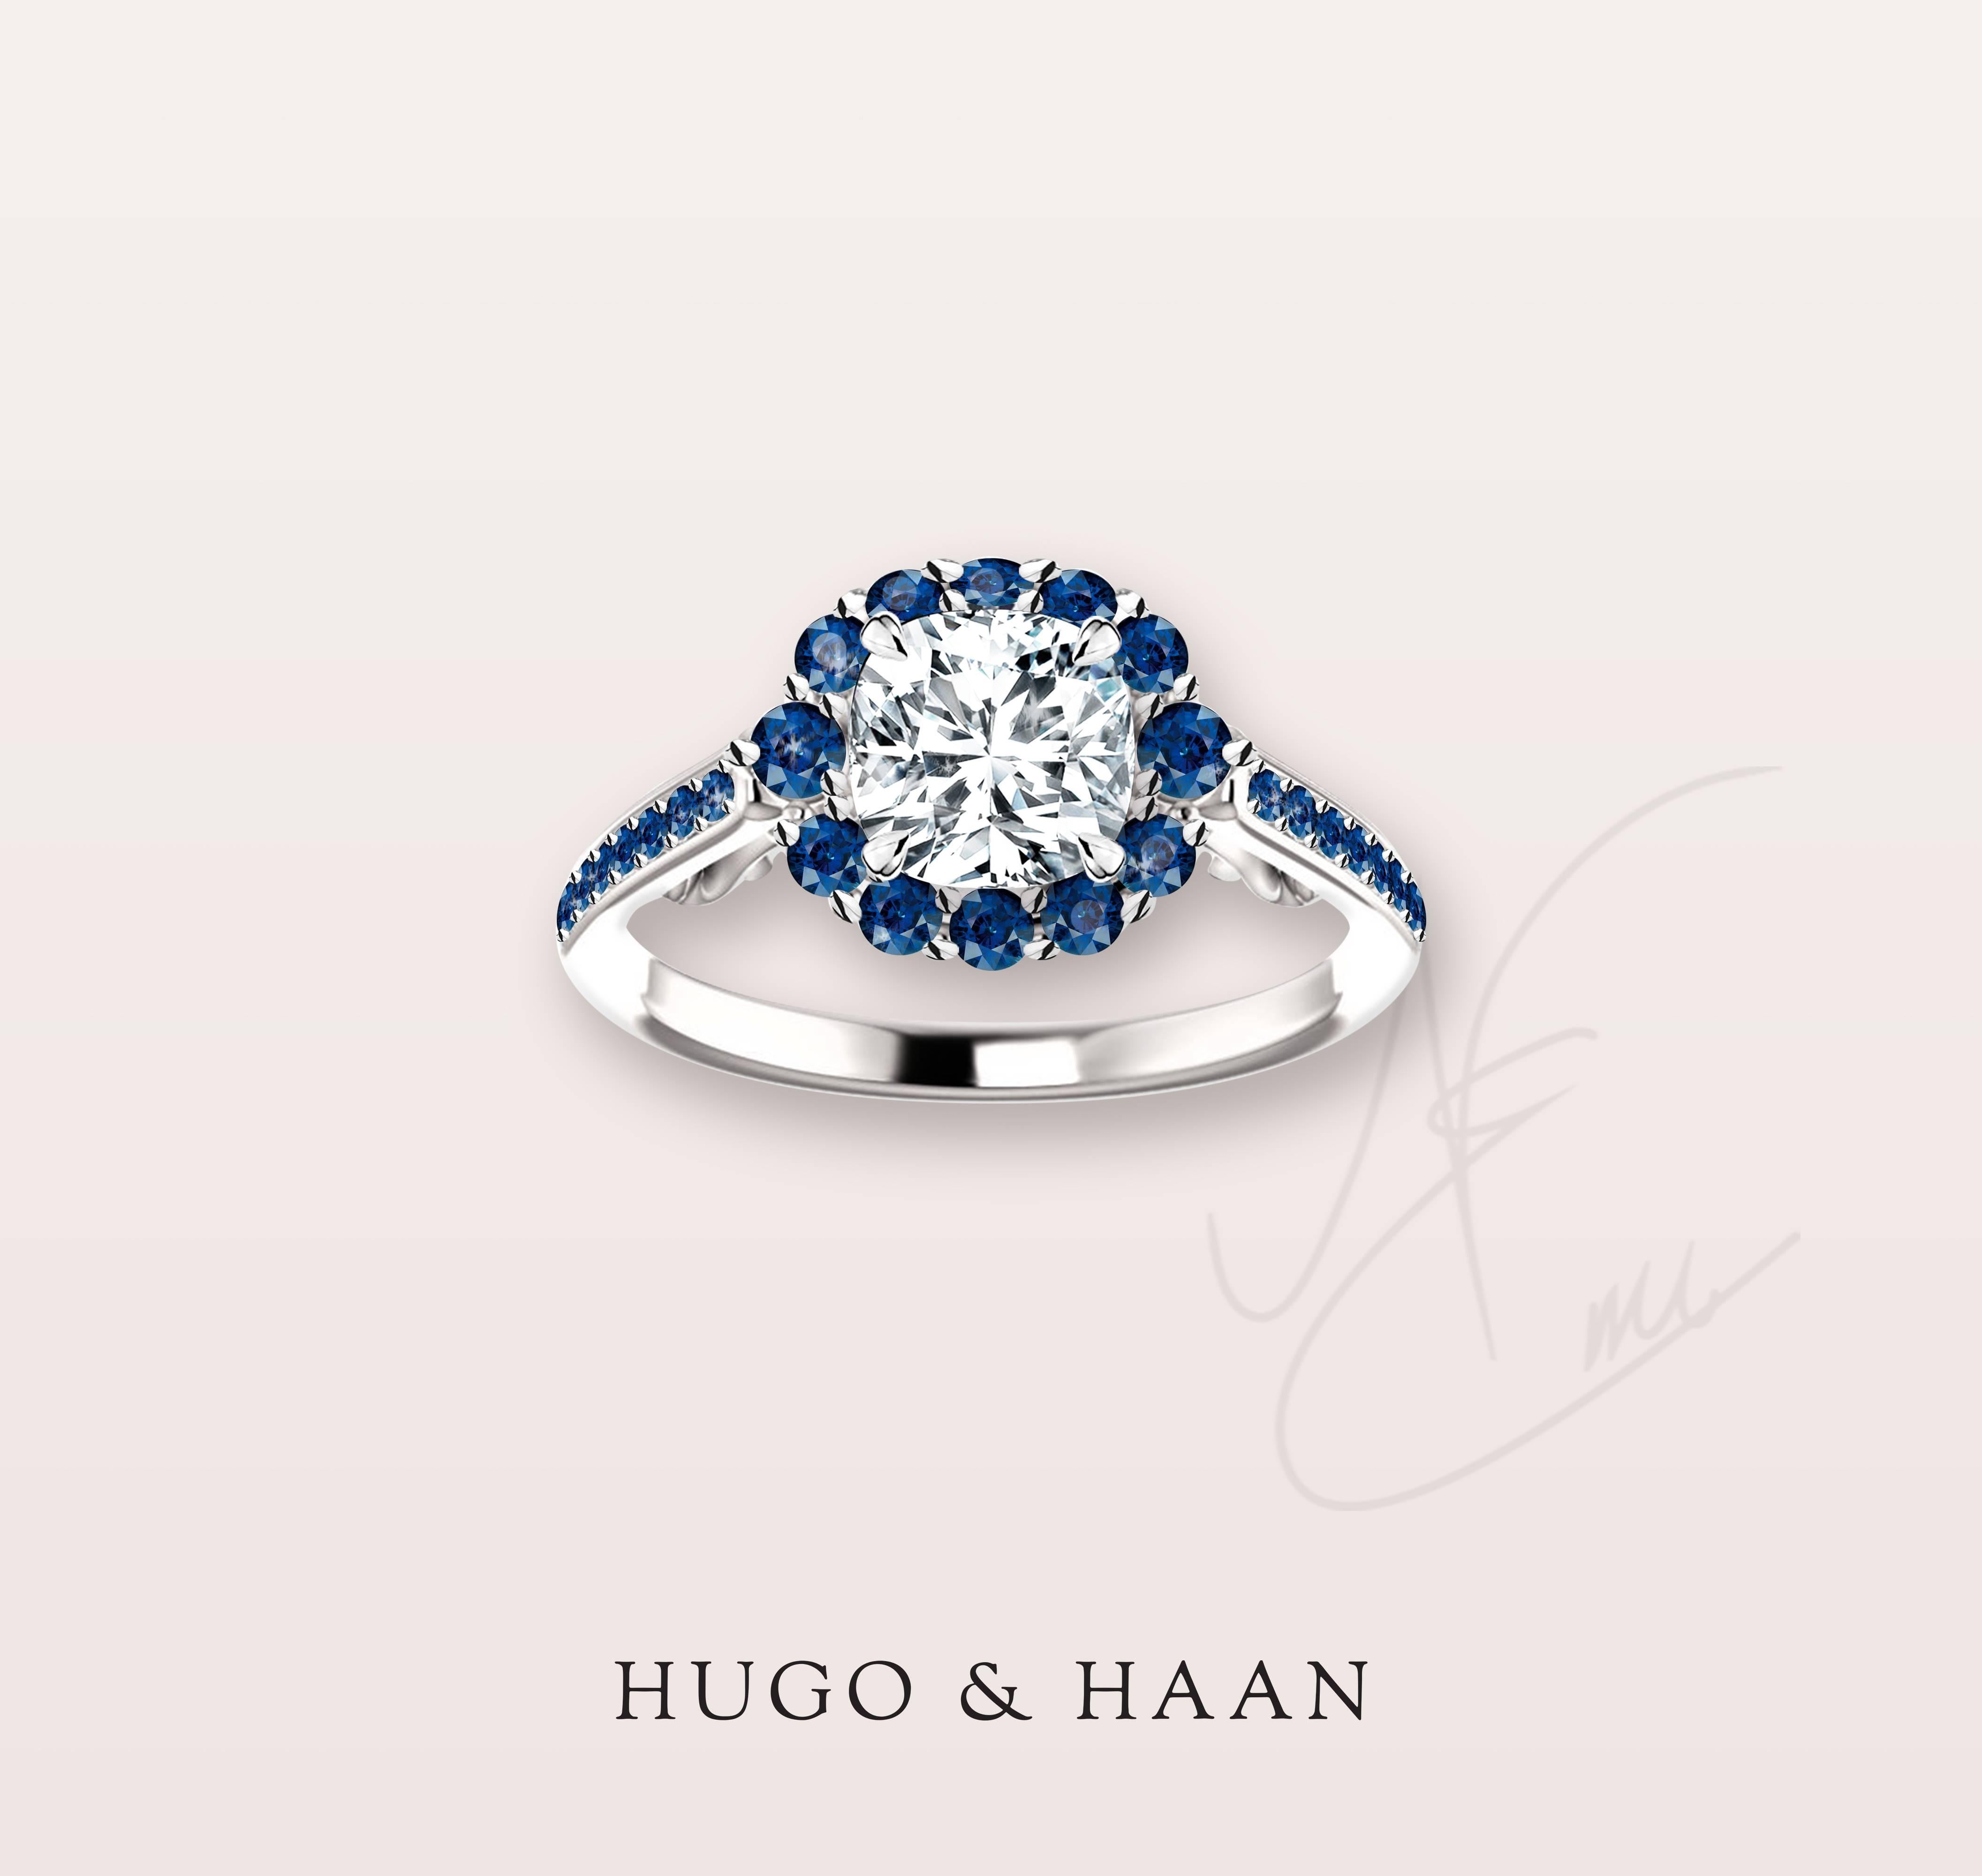 Details:
- 1.01 ct Cushion Cut G/VS1 Diamond with GIA certification

Details:

Material : 18k White Gold
Principle Gemstone : 1.01 ct Cushion Cut G/VS1 Diamond
Other Gemstone : Blue sapphires
Diamond Certified: Yes - GIA certified
Customizable: